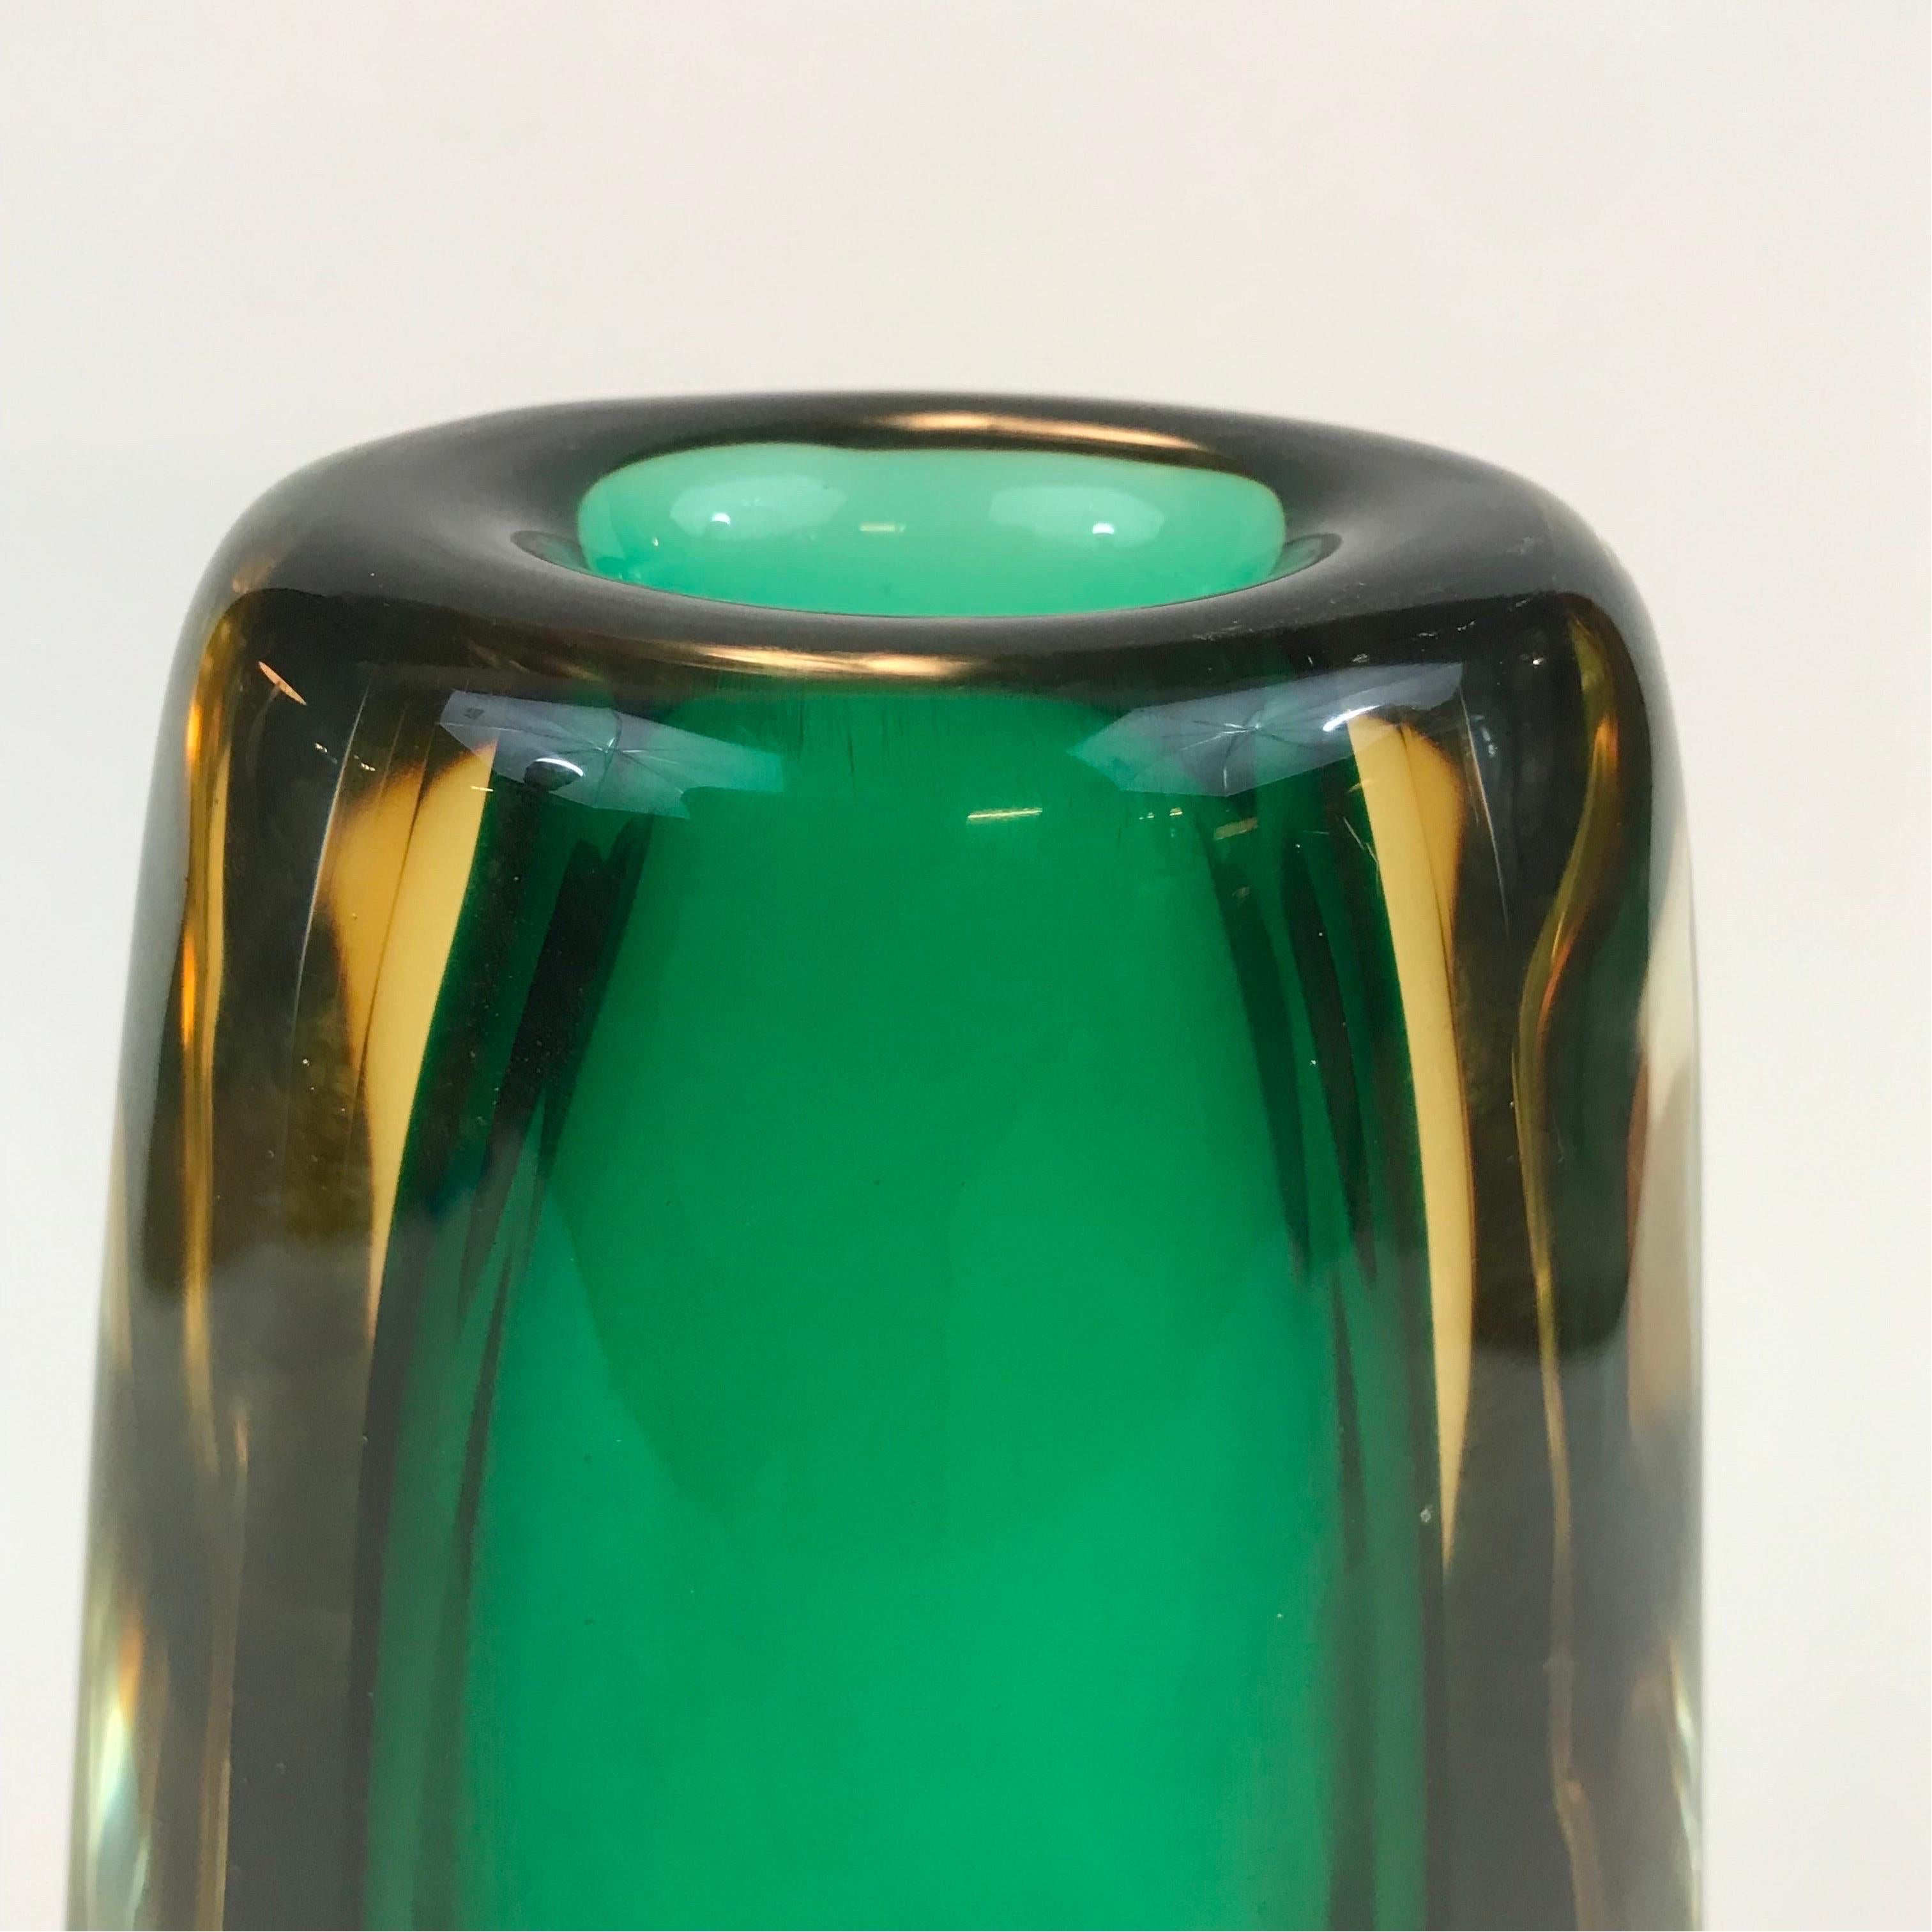 Blown Glass Tall Flavio Poli Sommerso Technique Vase in Clear, Amber and Green Glass For Sale